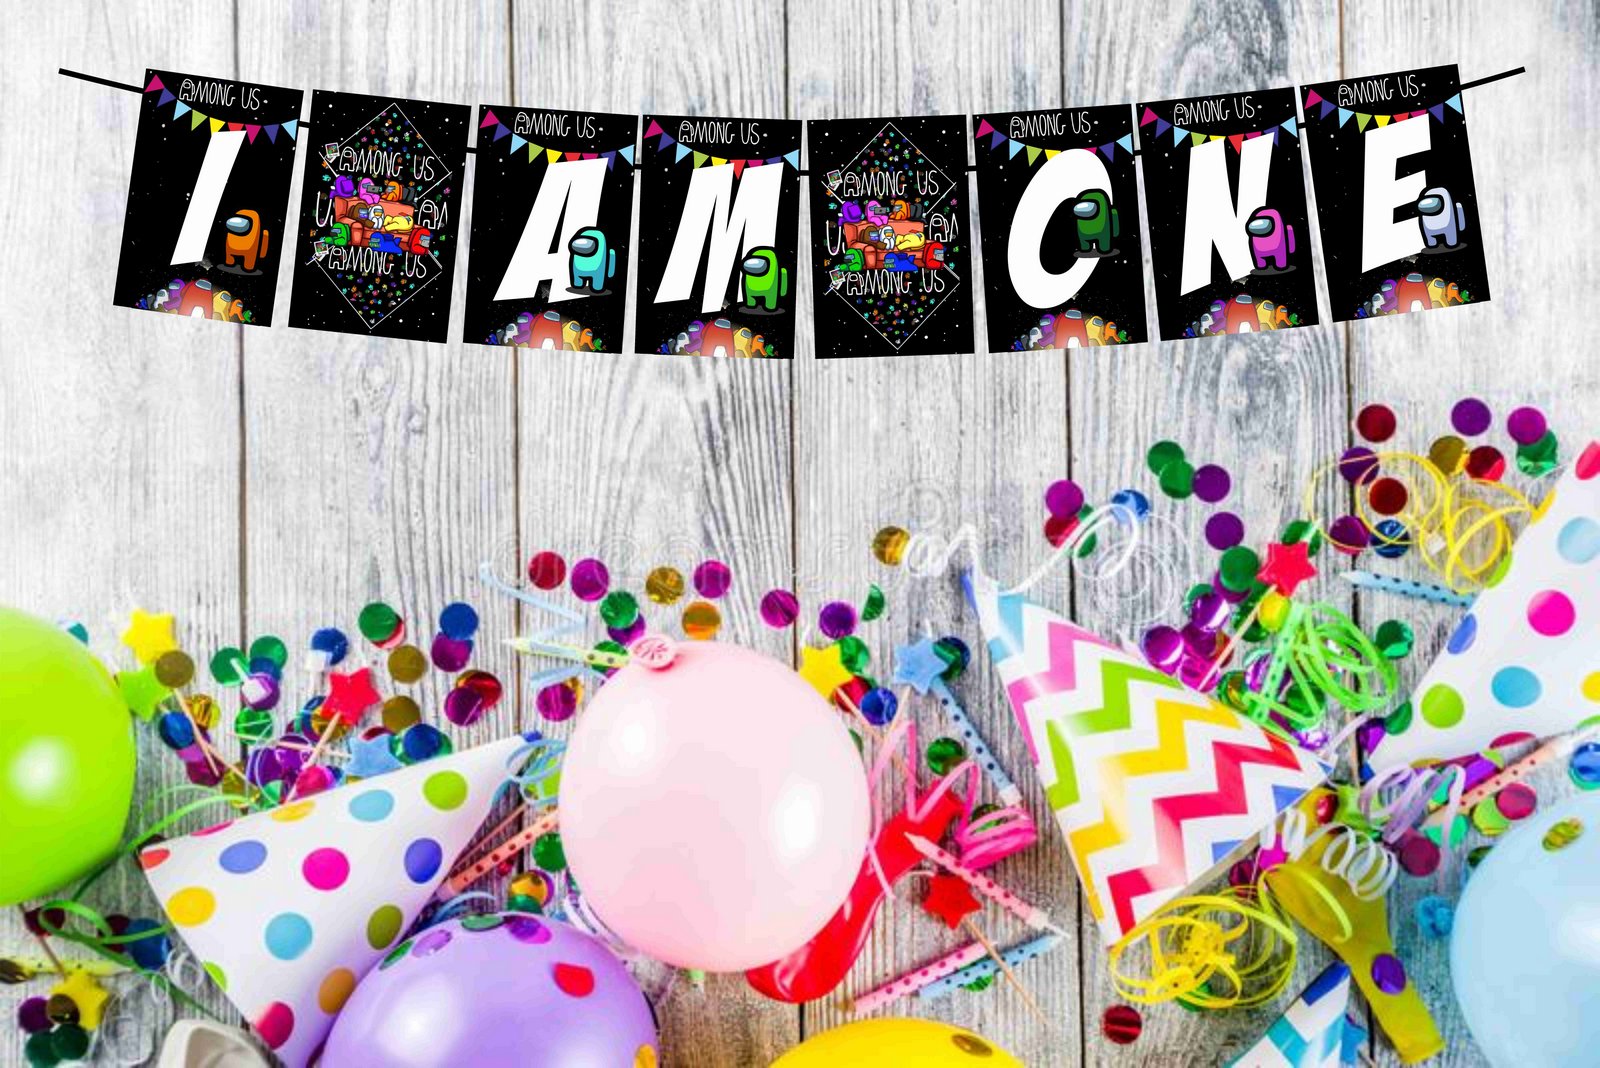 Among Us I Am One 1st Birthday Banner for Photo Shoot Backdrop and Theme Party - Balloonistics